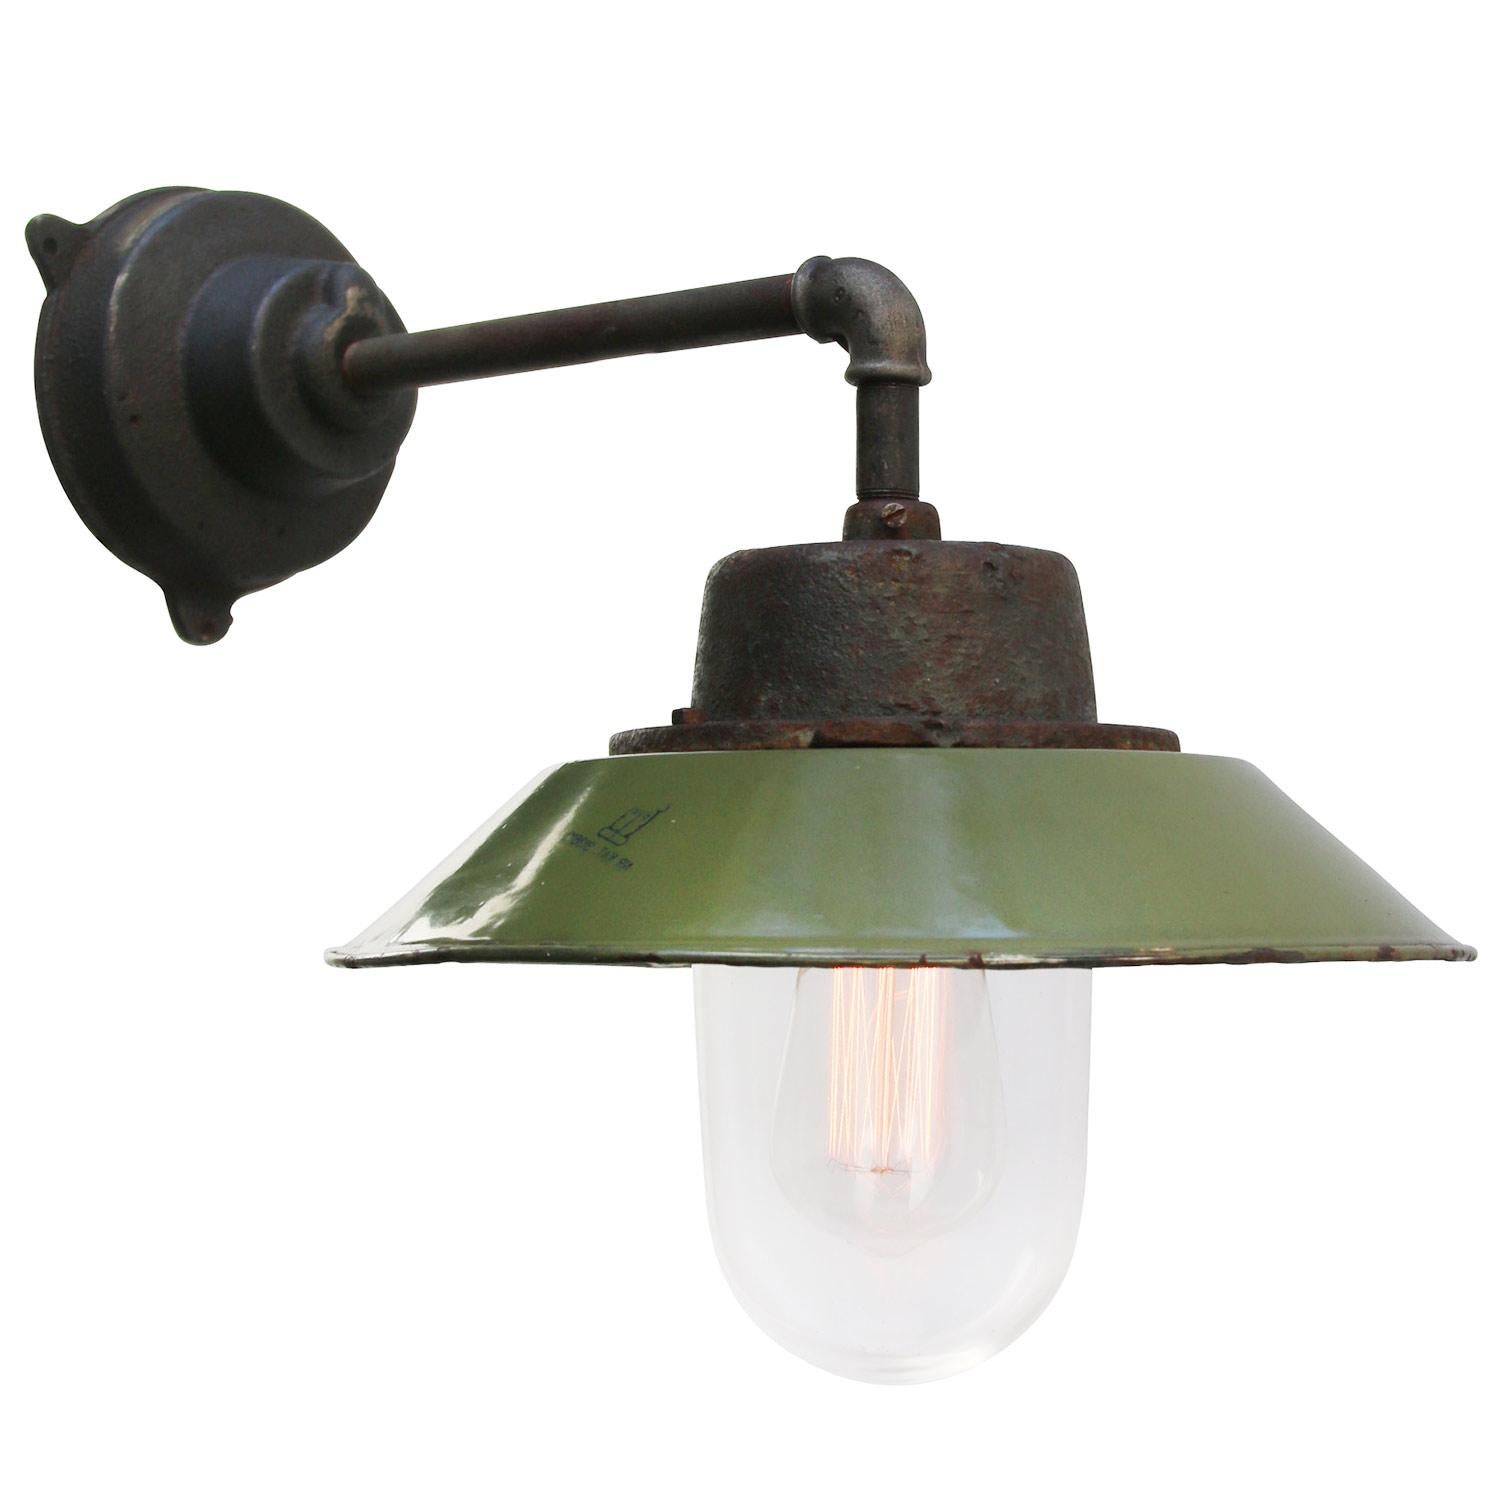 Green colored enamel industrial wall light with white interior.
Clear glass.

Diameter cast iron wall mount: 12 cm, 3 holes to secure.

Weight: 5.5 kg / 12.1 lb

For use outdoors as well as indoors. 

Priced per individual item. All lamps